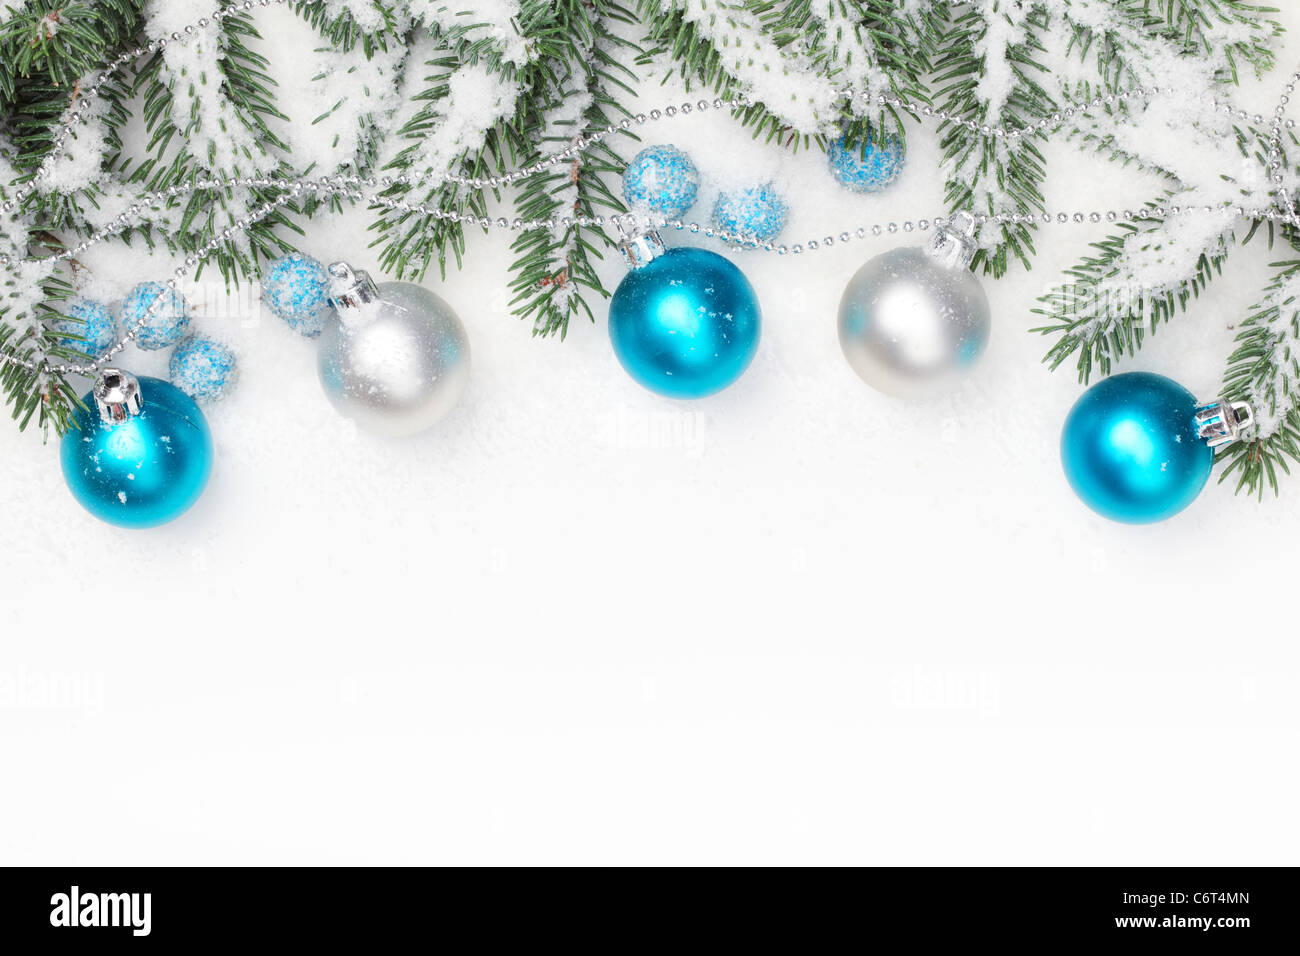 Christmas ornaments in the snowflakes. Stock Photo